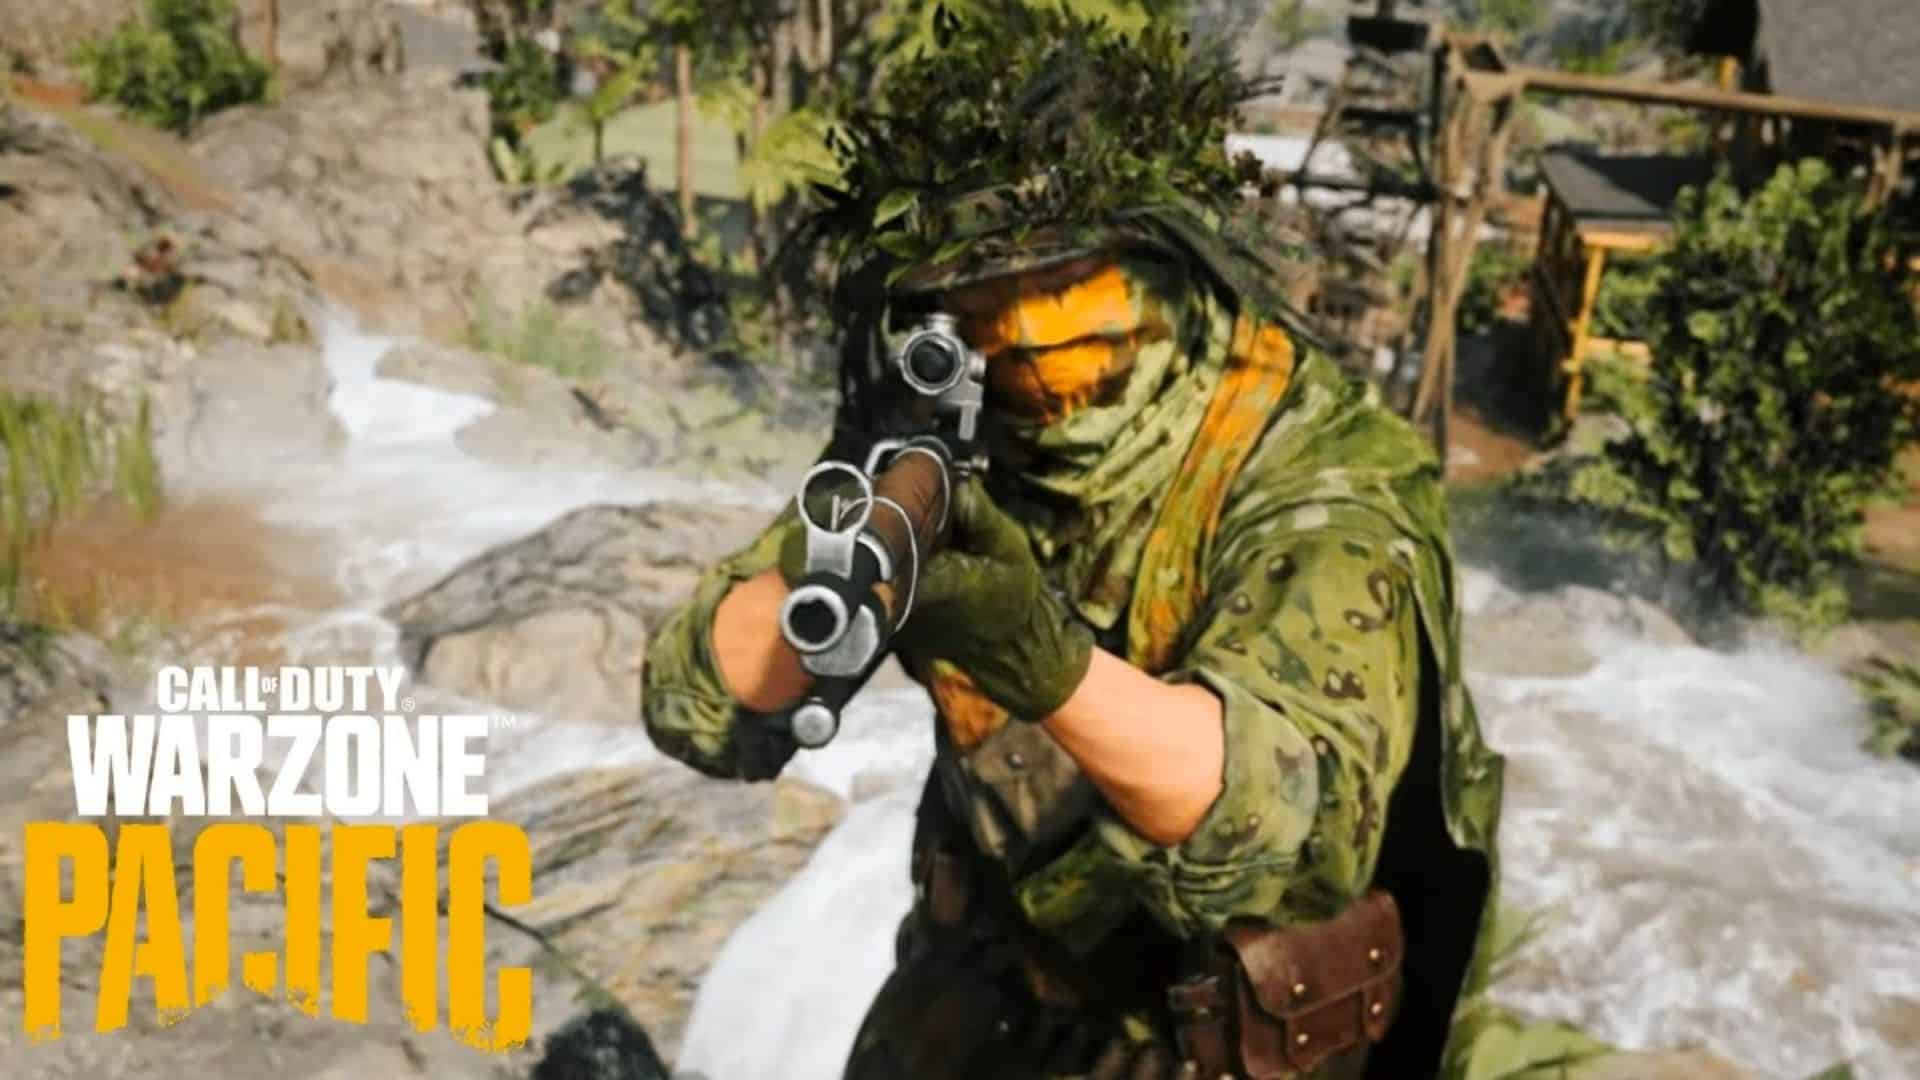 Warzone character in camoflague pointing sniper